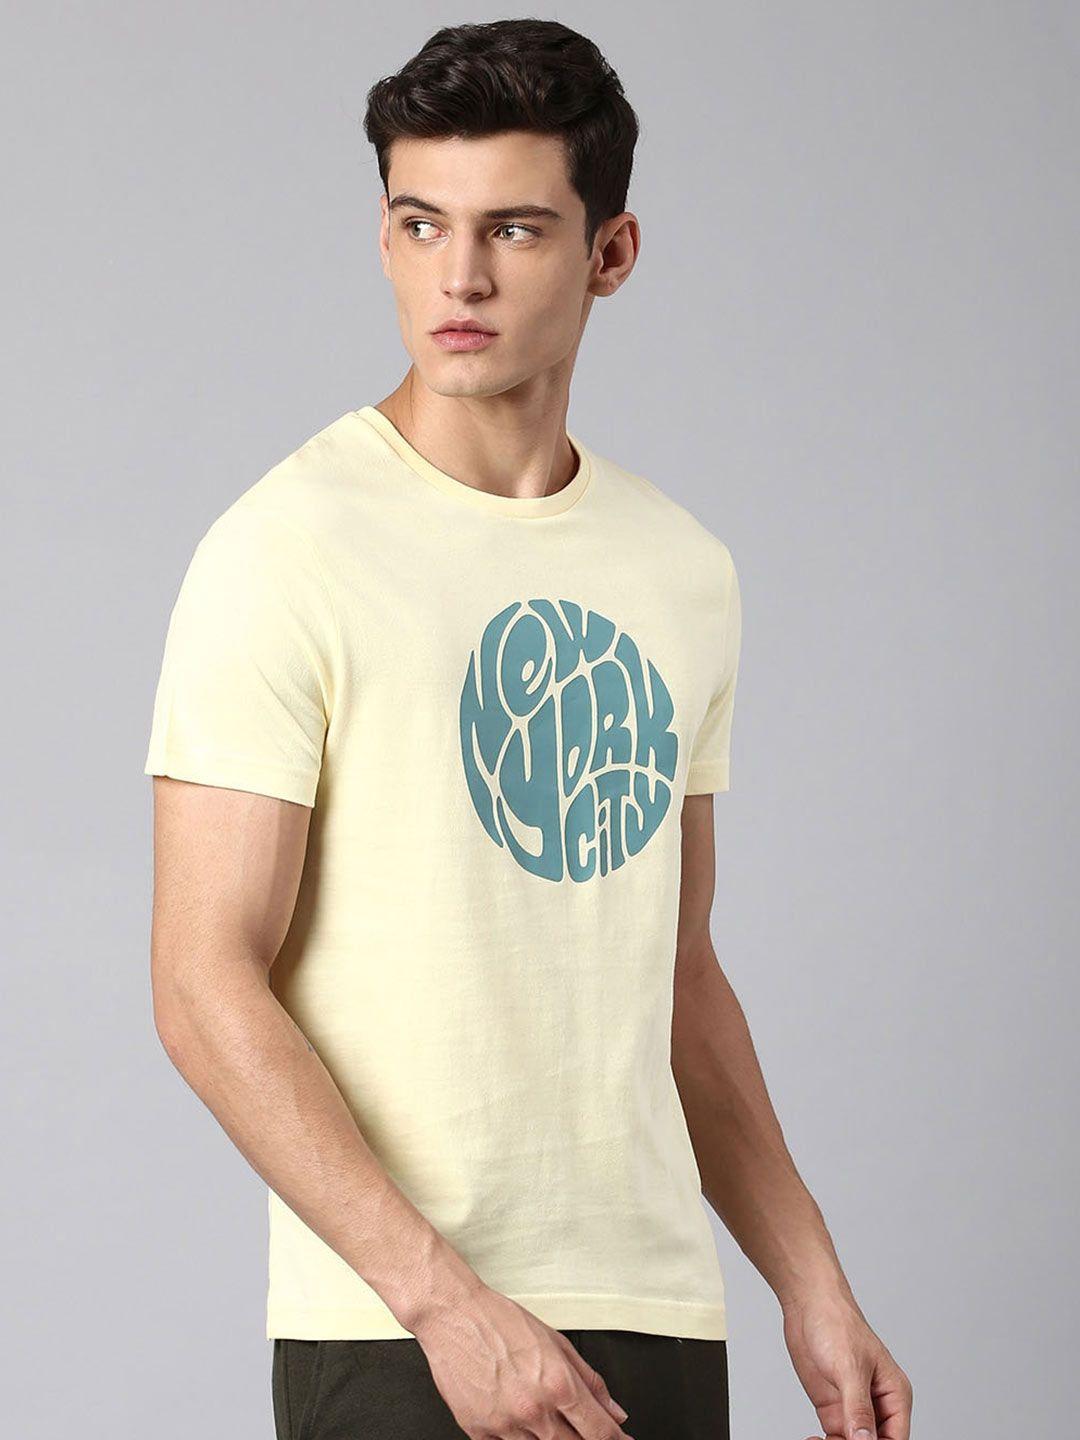 hubberholme typography printed pure cotton t-shirt